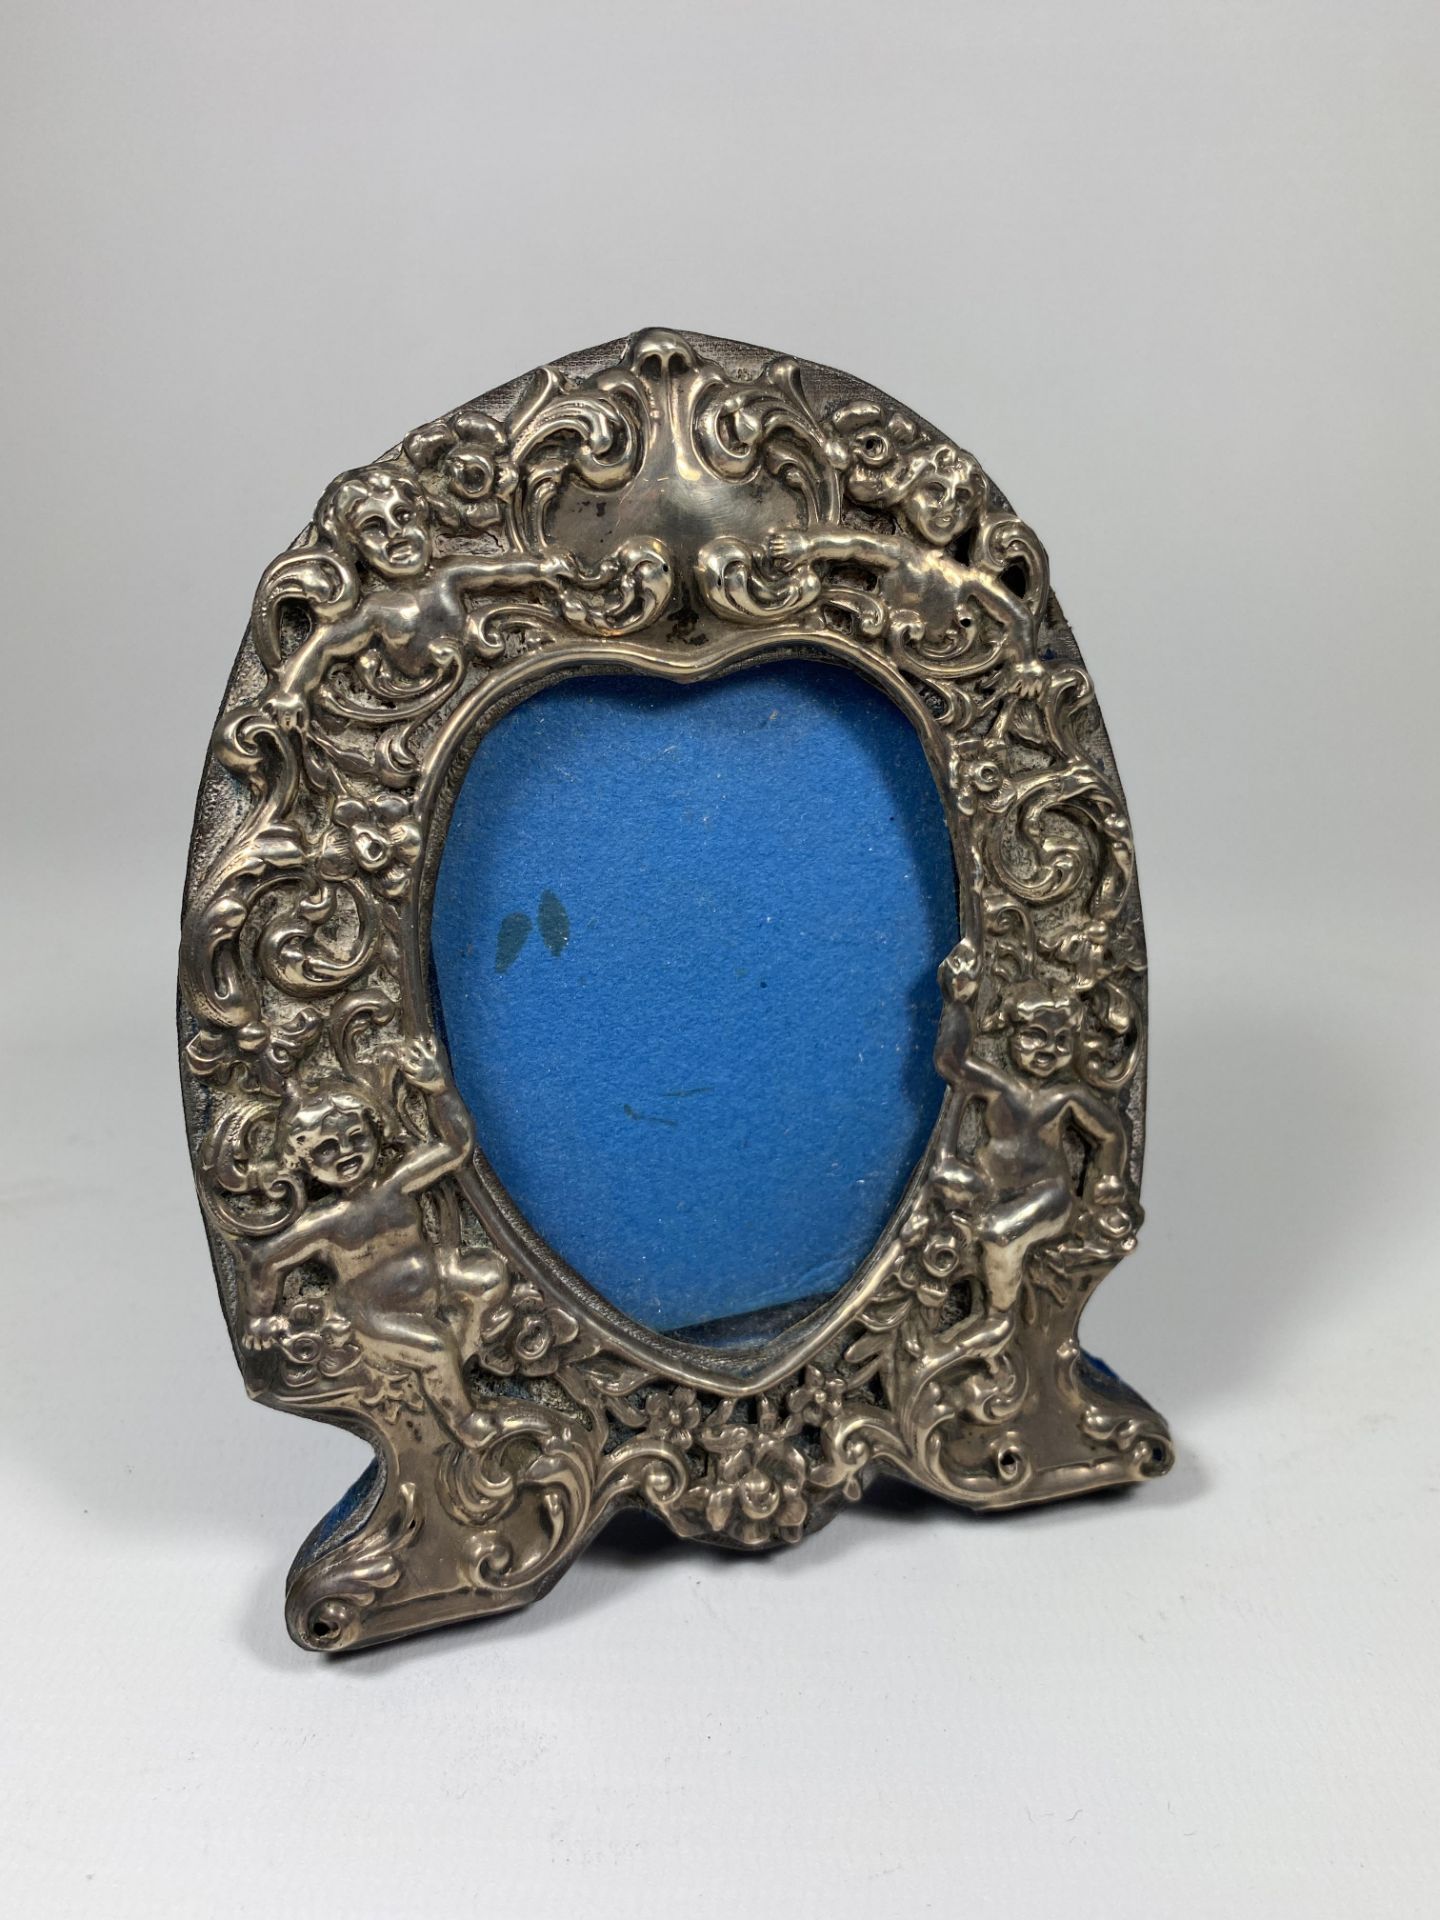 A VICTORIAN STERLING SILVER PHOTO FRAME WITH CHERUB DESIGN